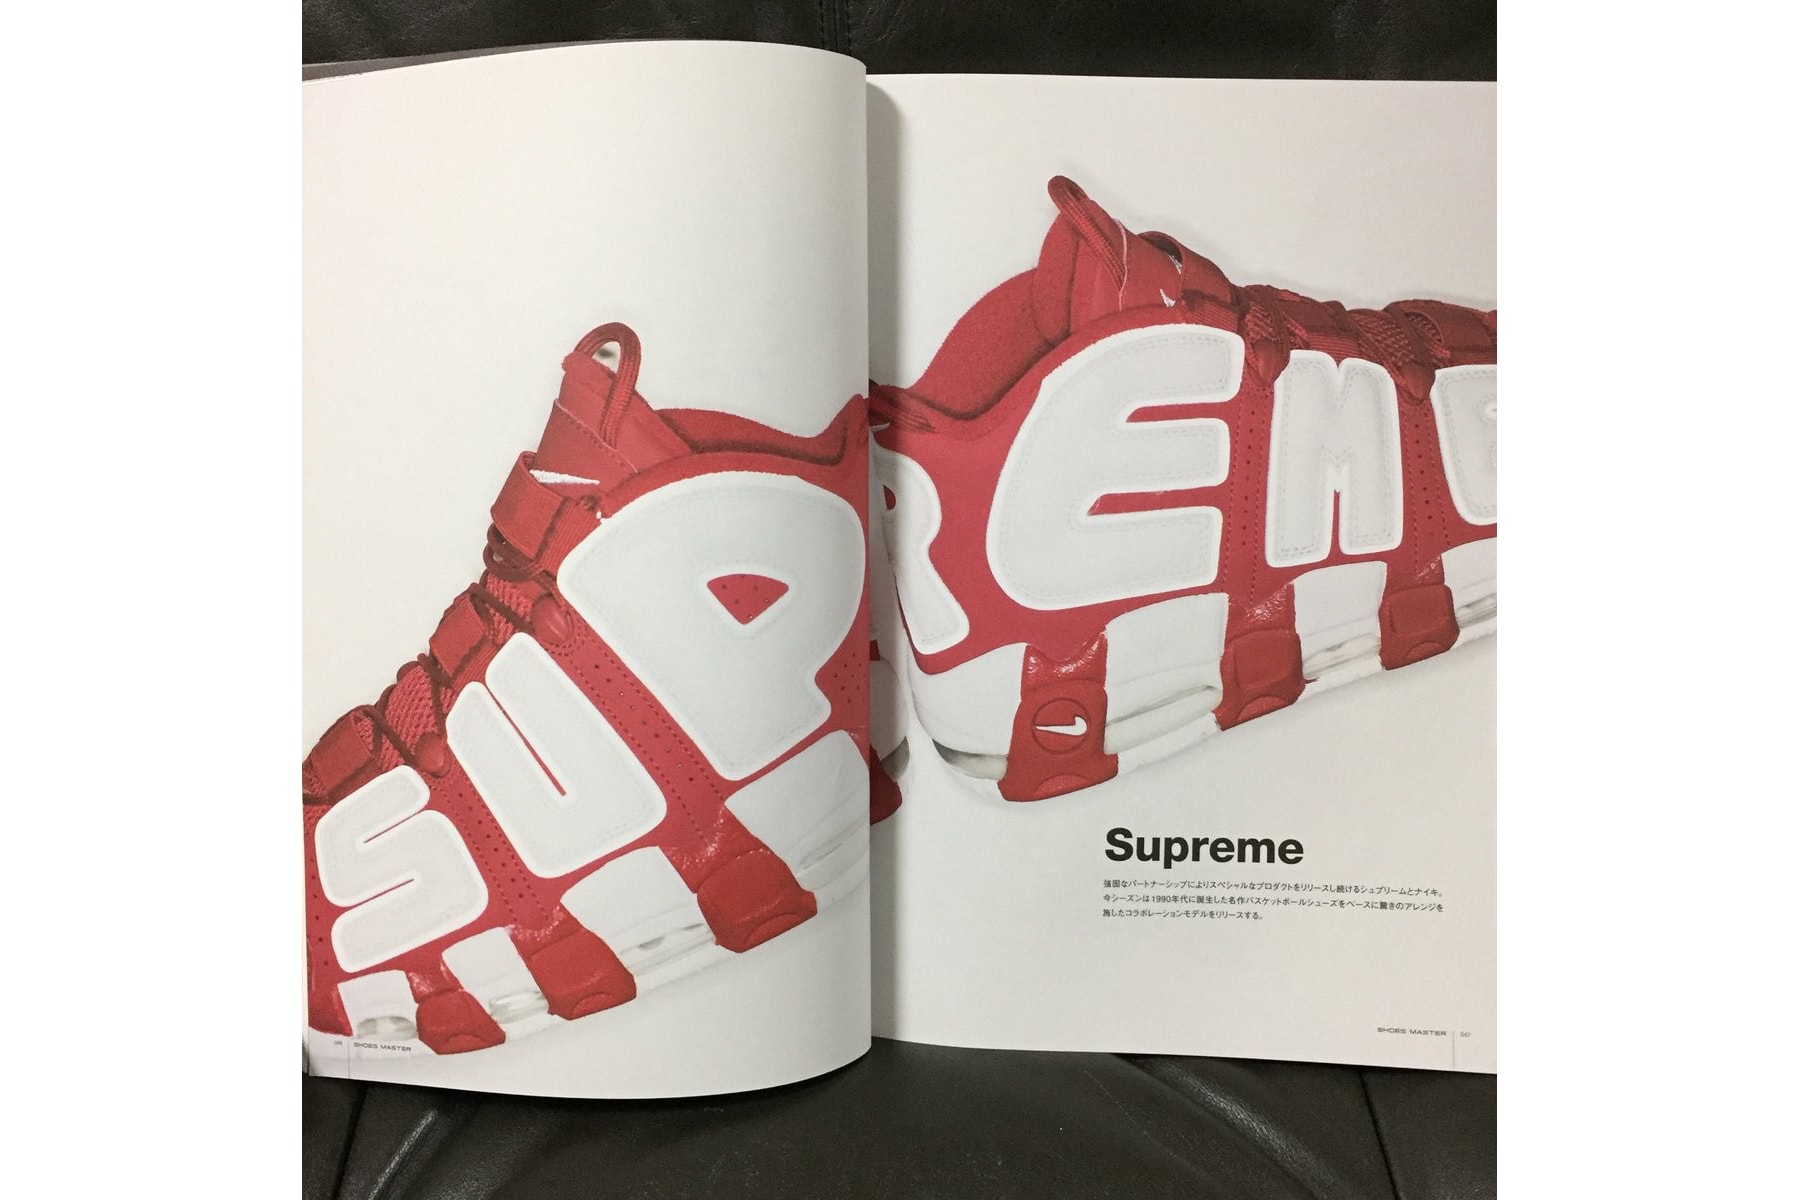 Supreme x Nike Air More Uptempo Full Look